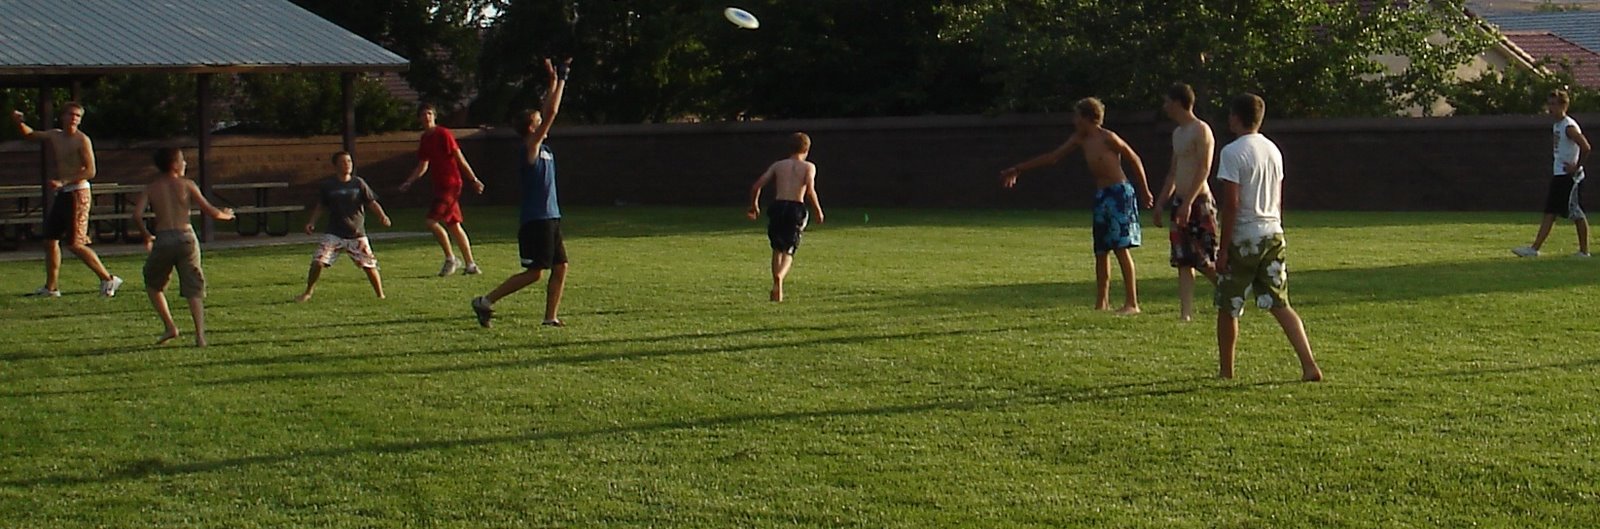 [whole+group+playing+frisbee.jpg]